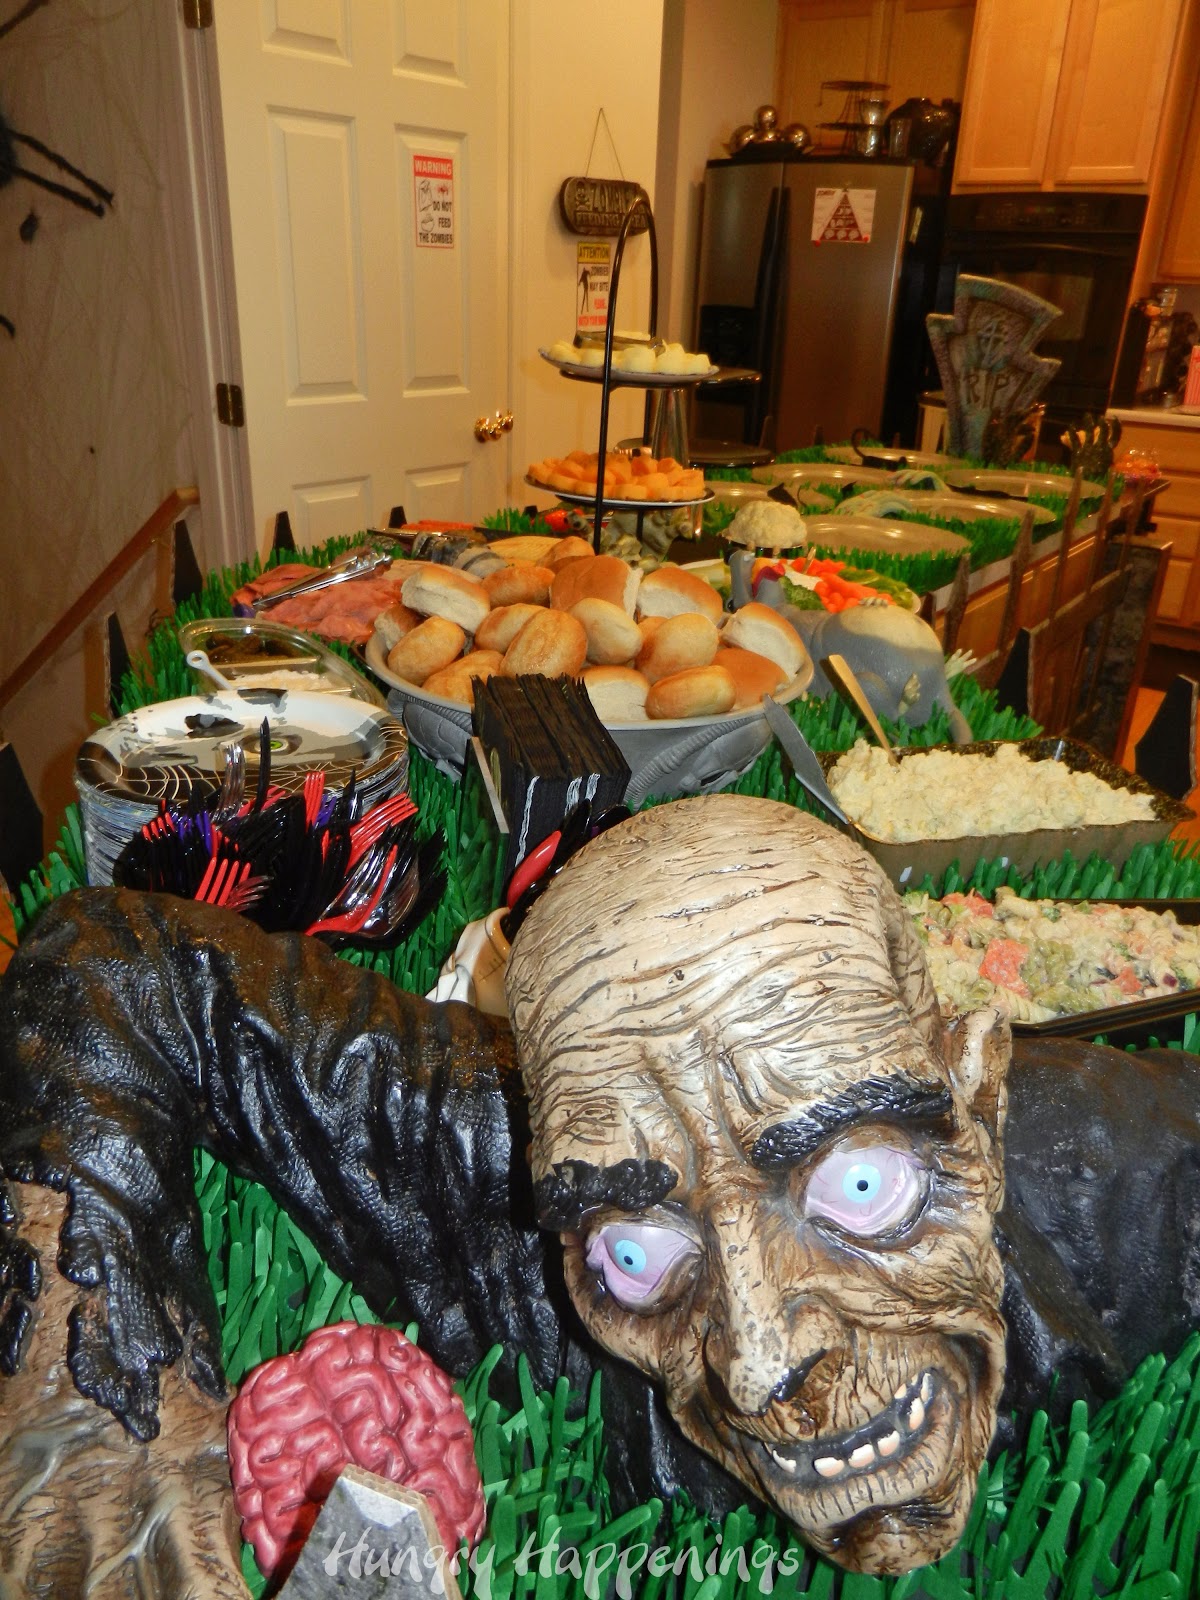  Zombie  Party  Party  Planning Ideas  for your Zombie  Themed  